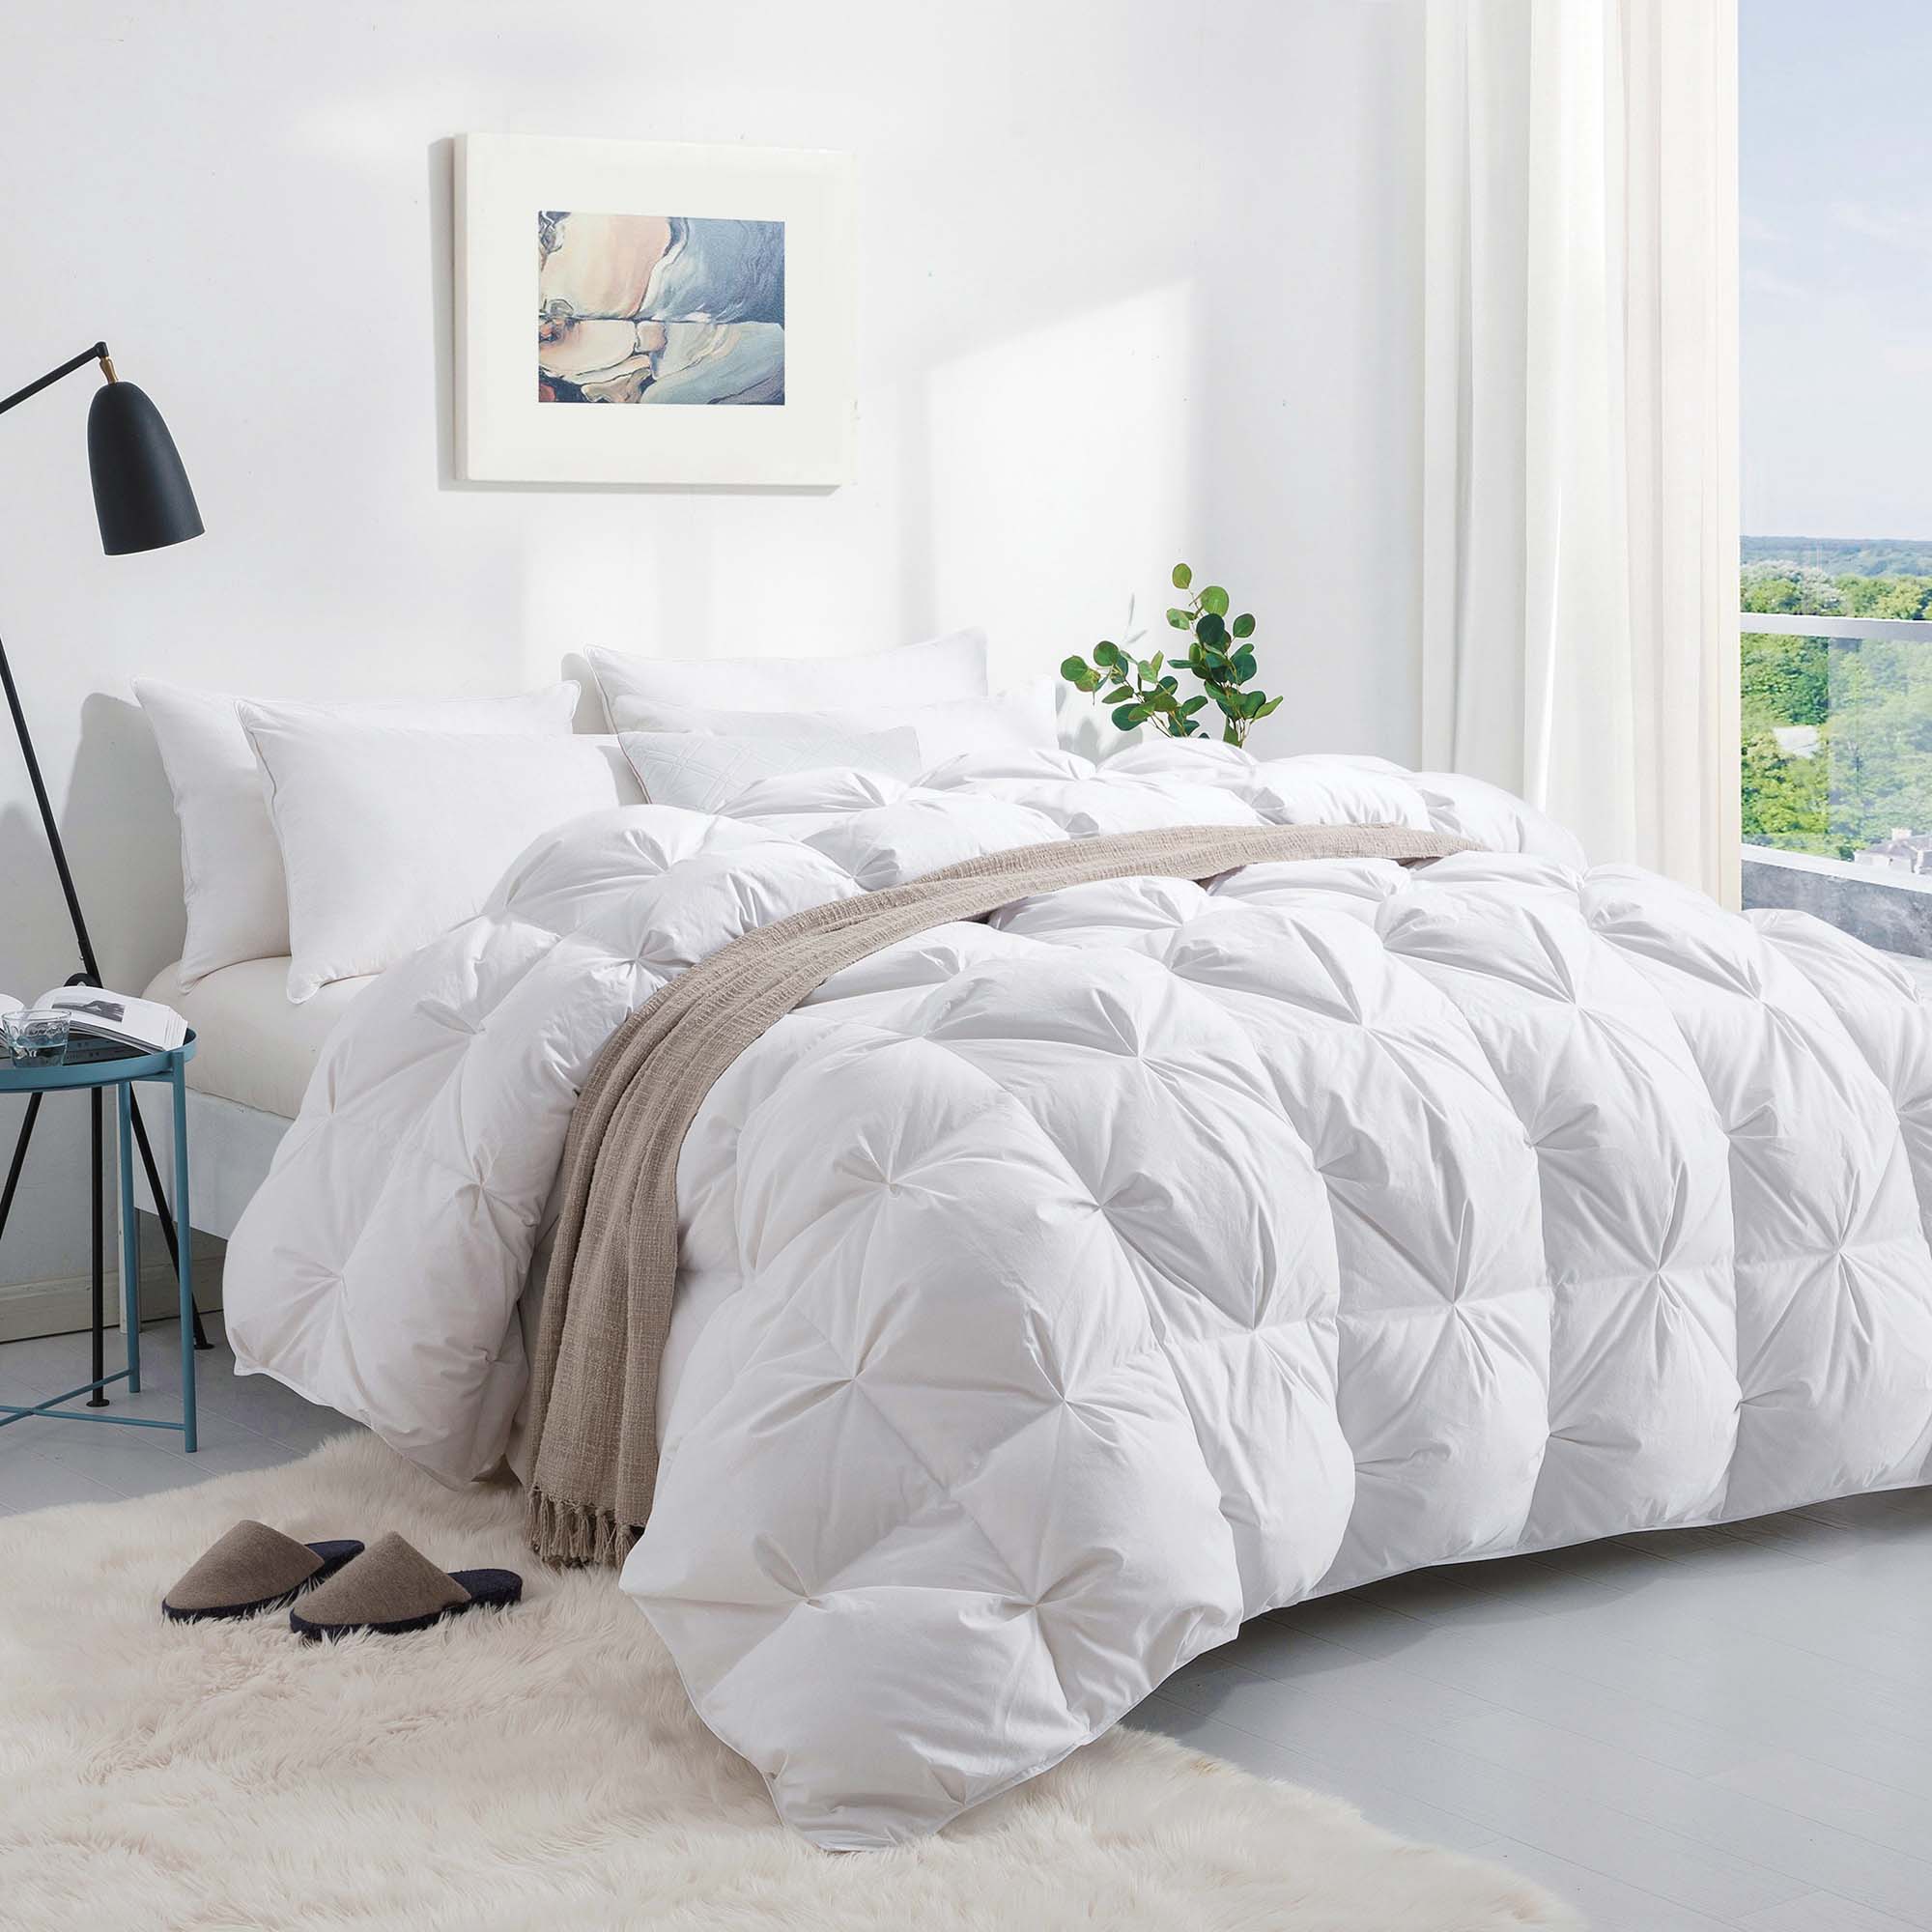 Puredown 400-Thread-Count Heavy Goose Down King Comforter in White